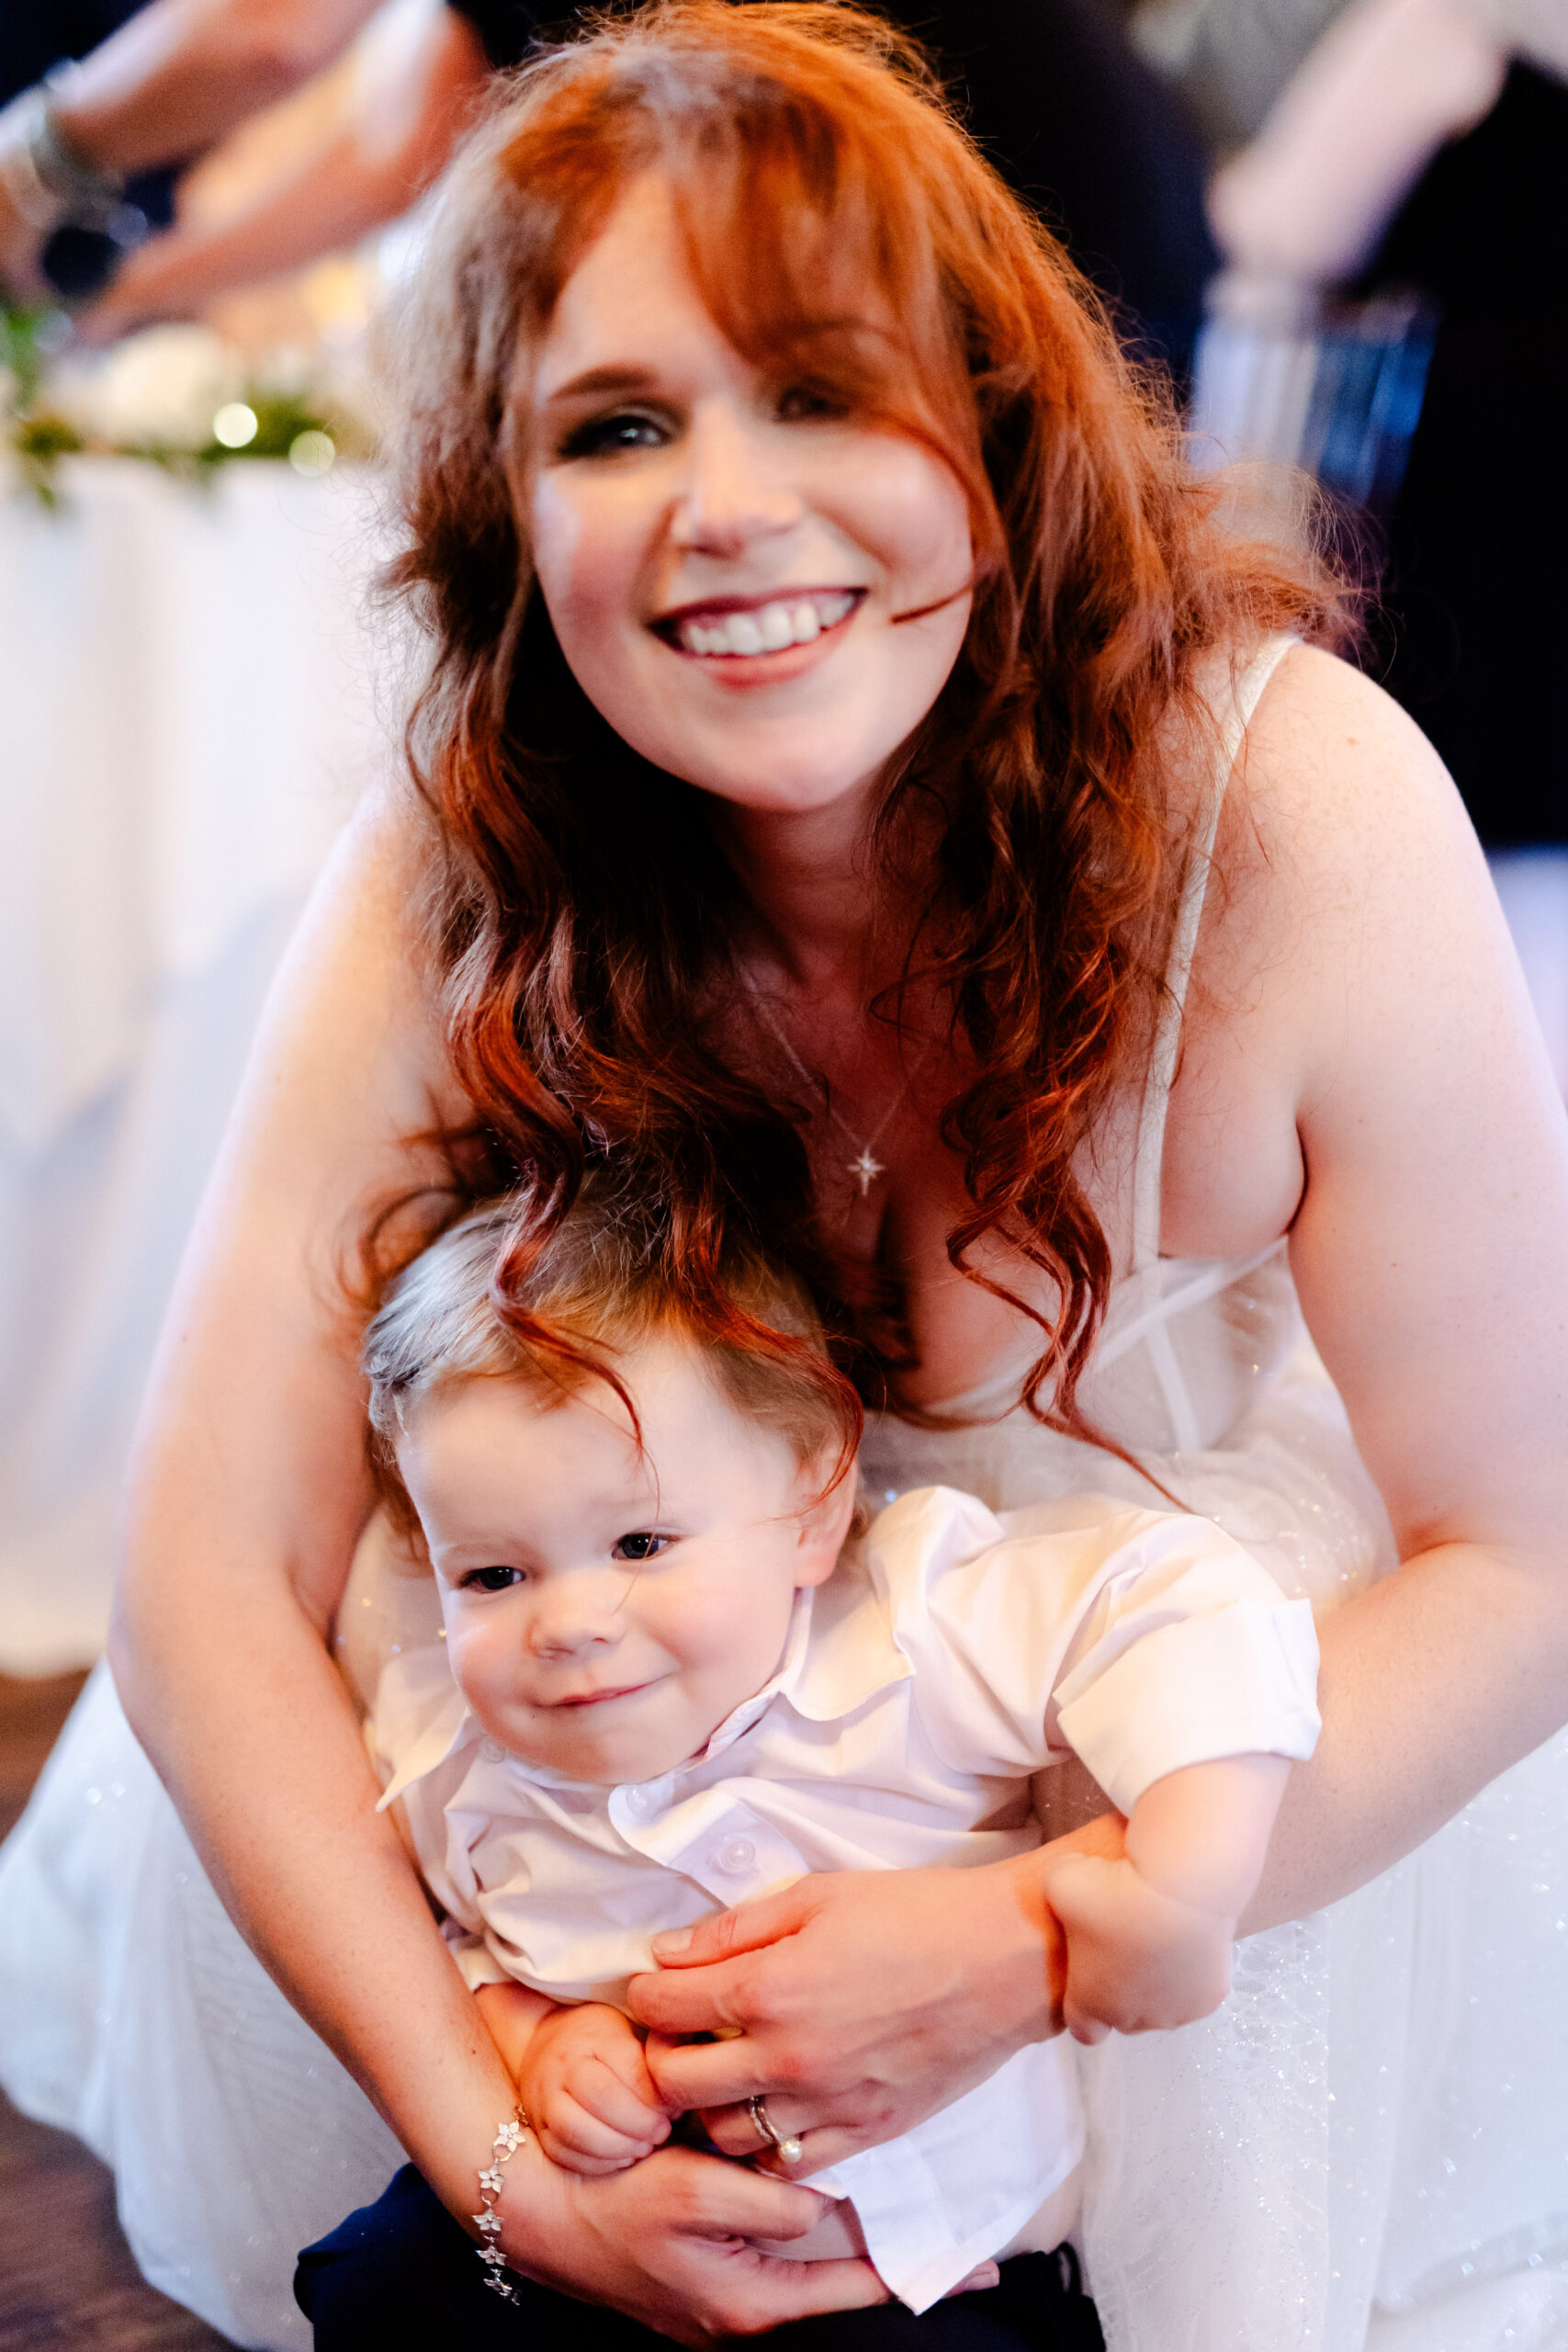 A lady cradling an infant during a marriage ceremony.